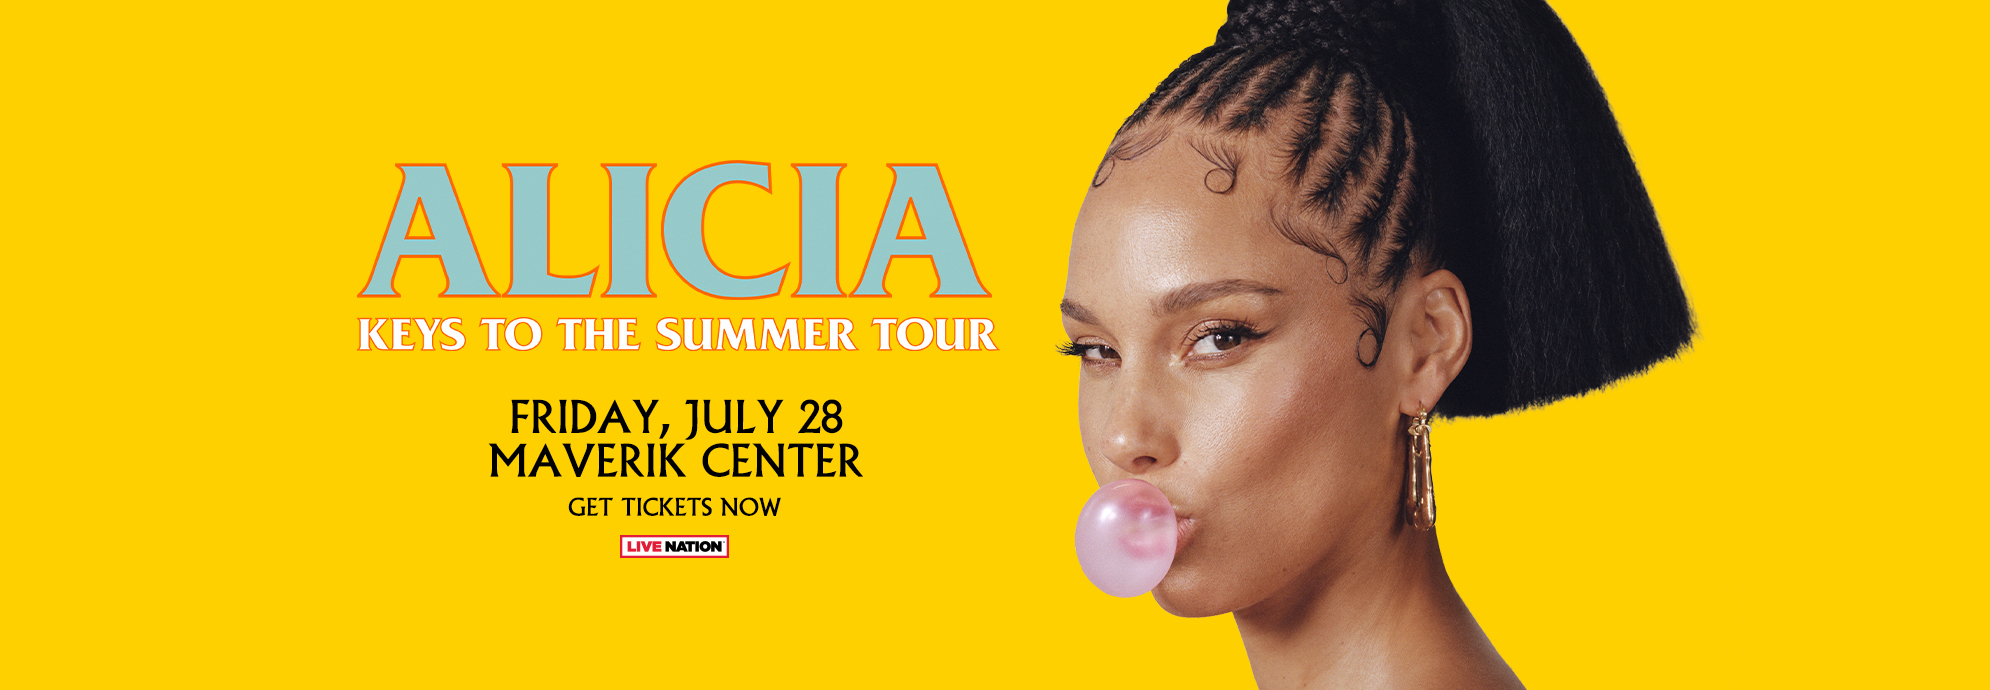 Alicia Keys to the Summer Tour